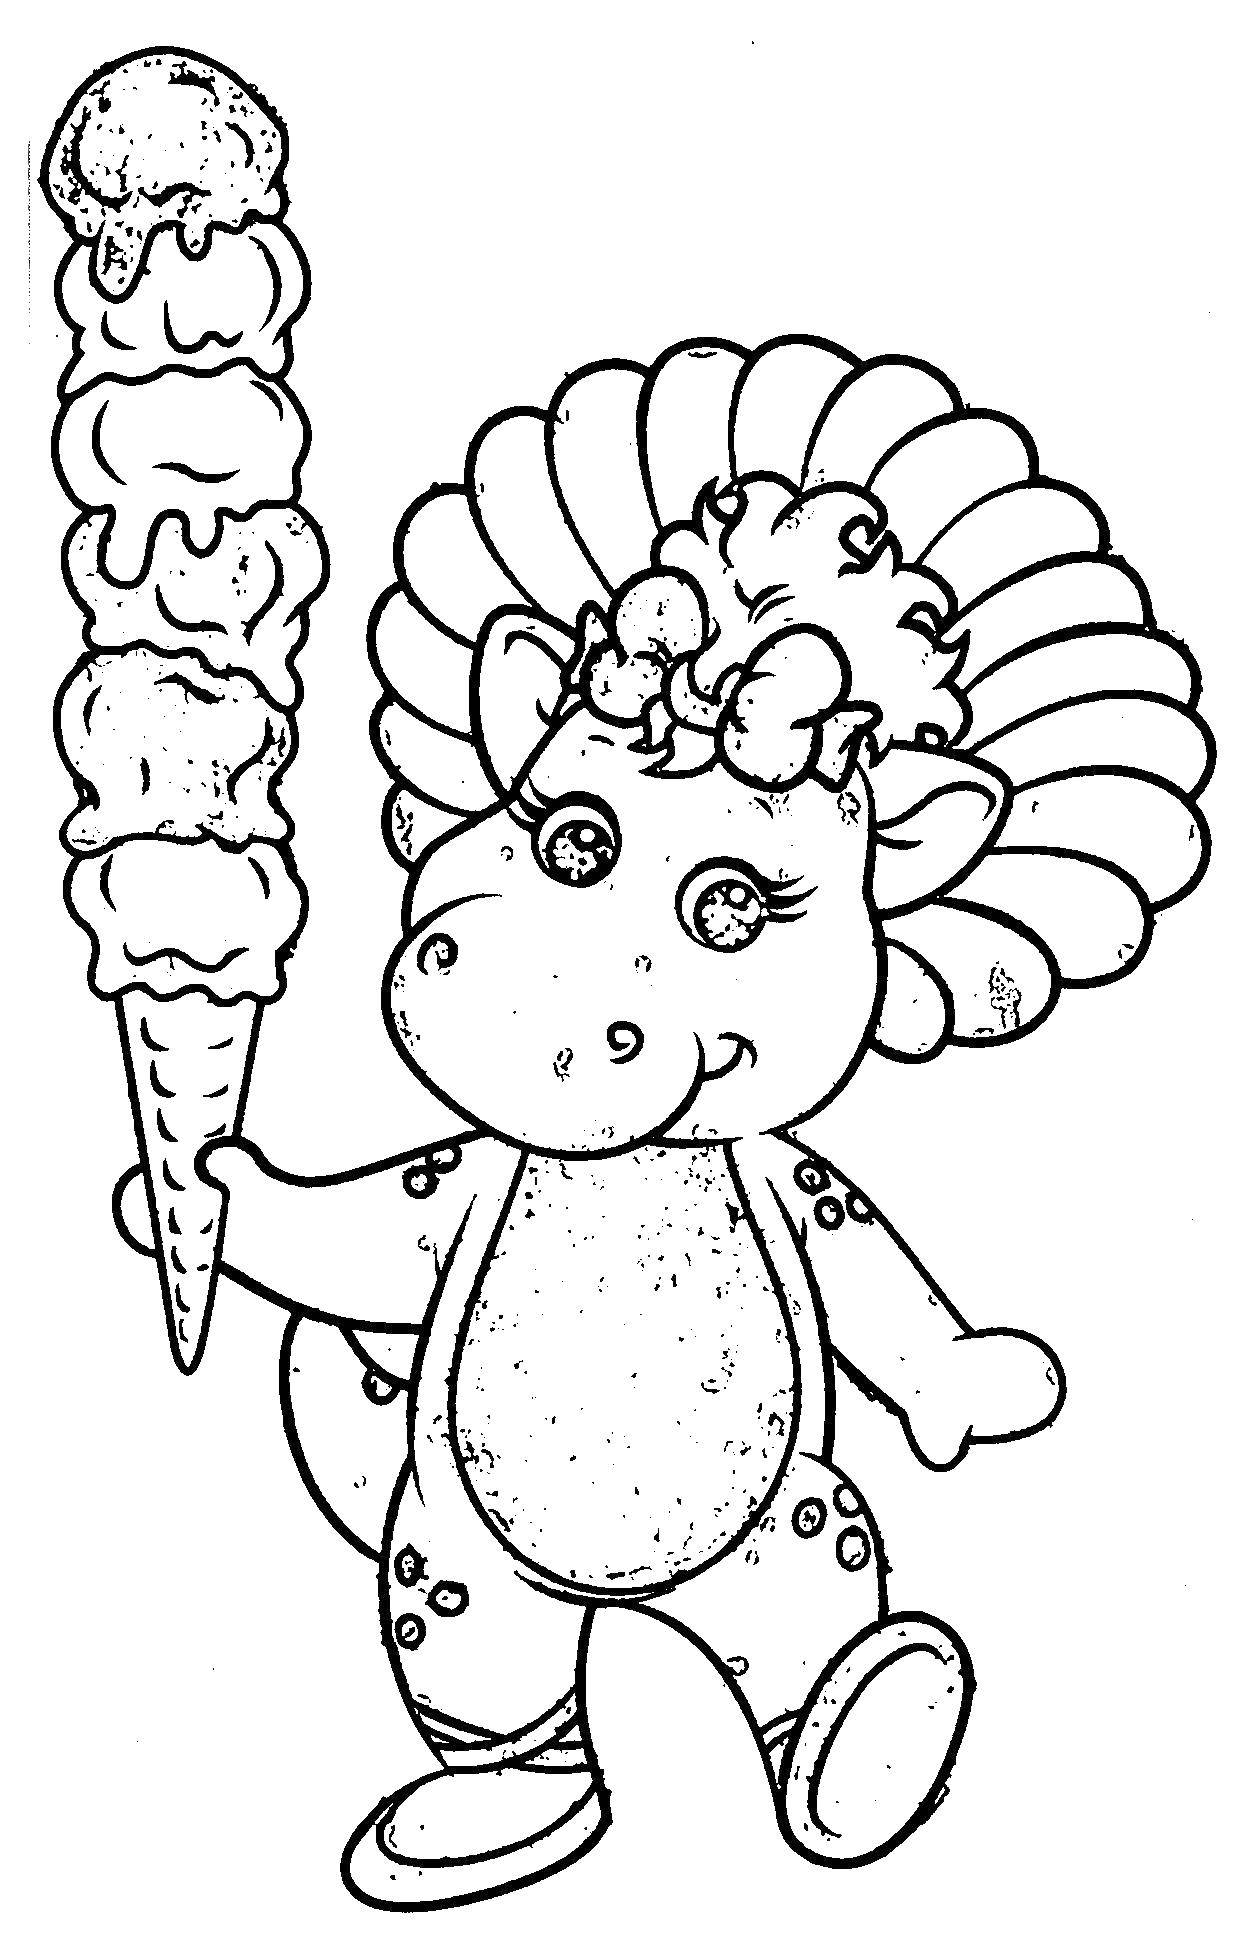 Coloring Hippo with ice cream. Category ice cream. Tags:  ice cream, Hippo.